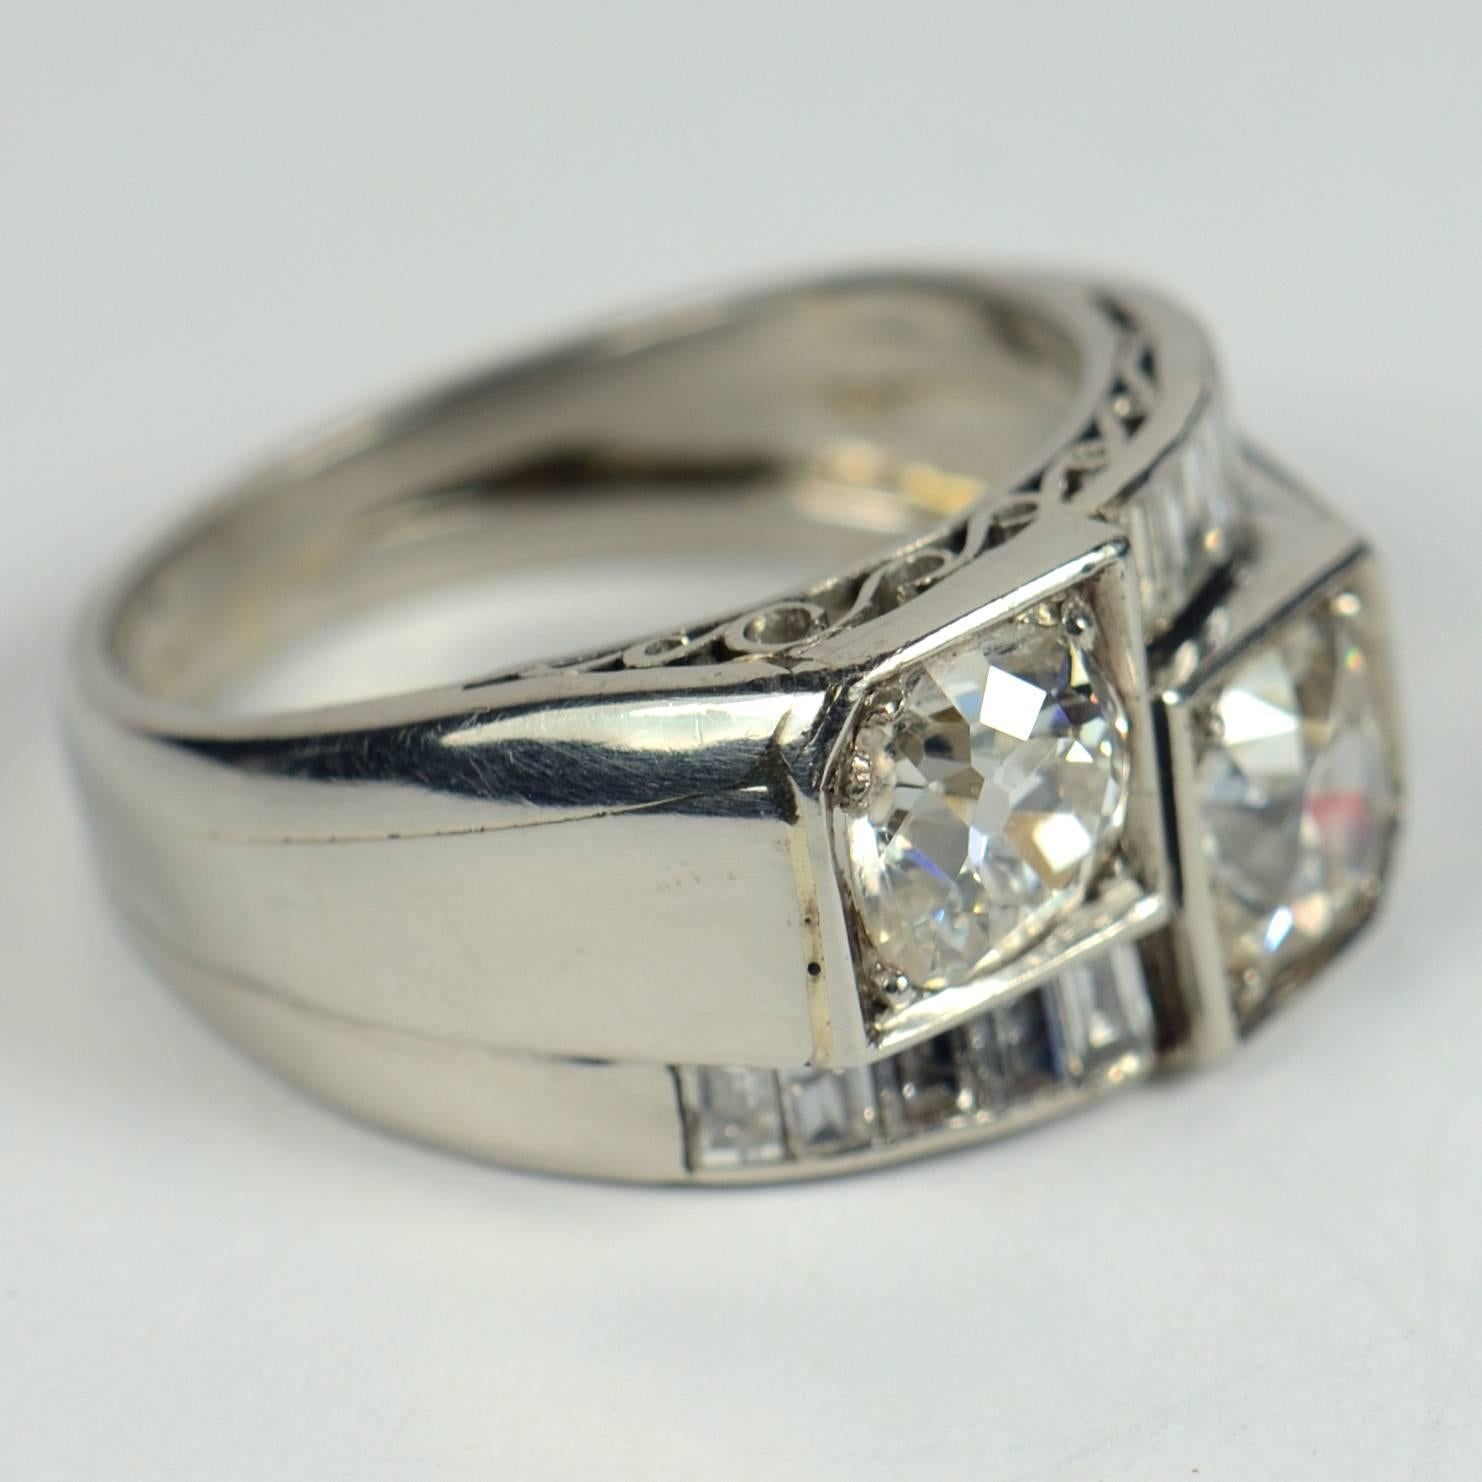 This late Art Deco ring is set with two old European-cut diamonds each weighing approximately 1.00 carats with I-J colour and Pique (included) clarity.  The diamonds are mounted in a geometric platinum setting, with alternating shoulders giving an